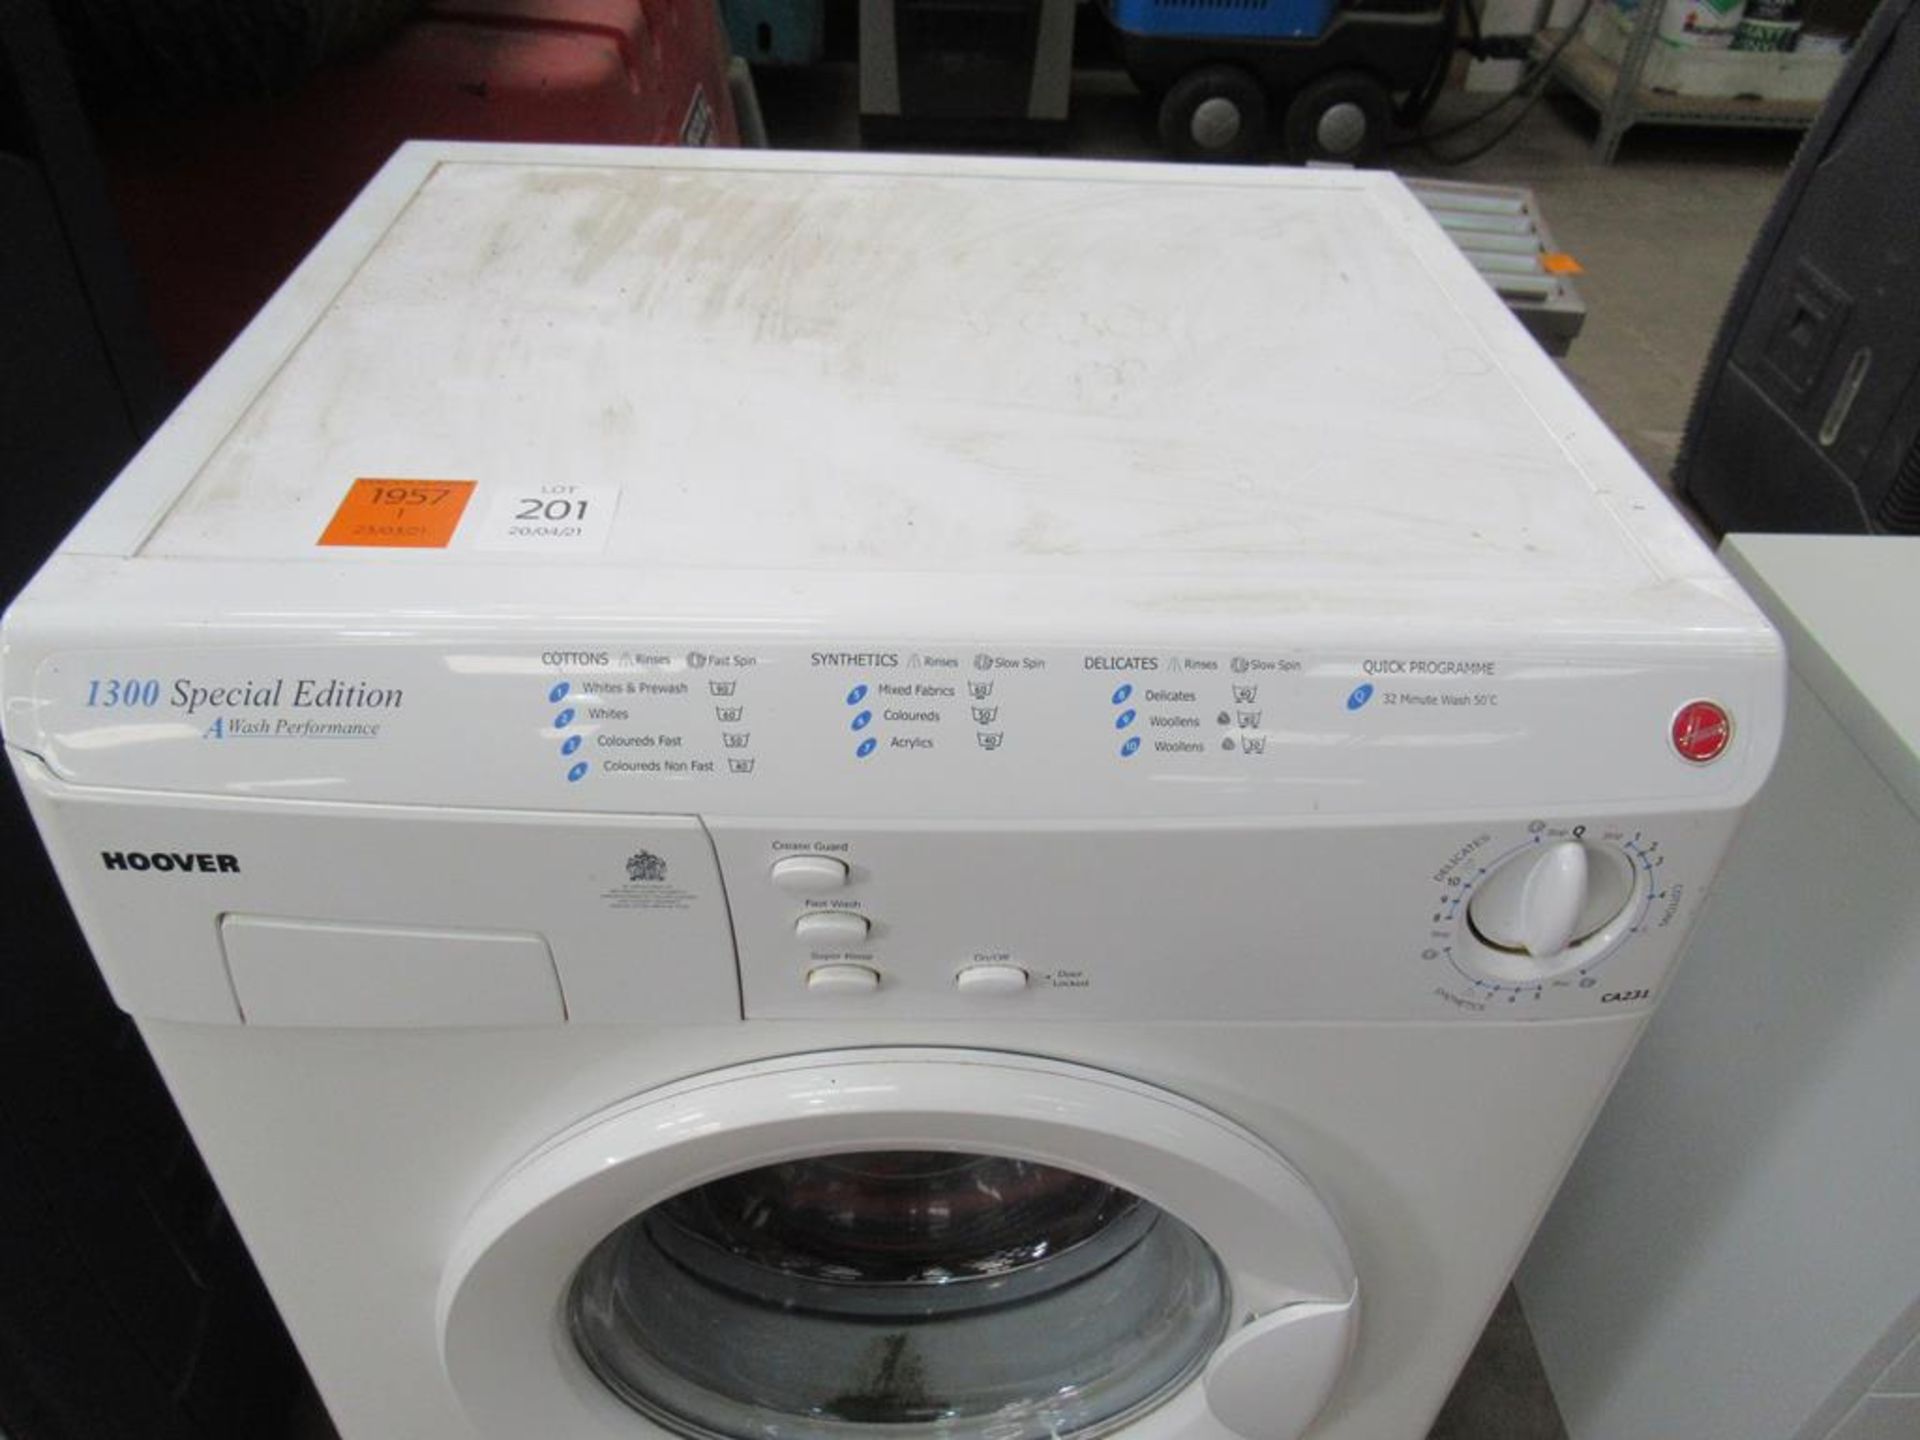 Hoover 1300 CA231 Washer - Image 2 of 2